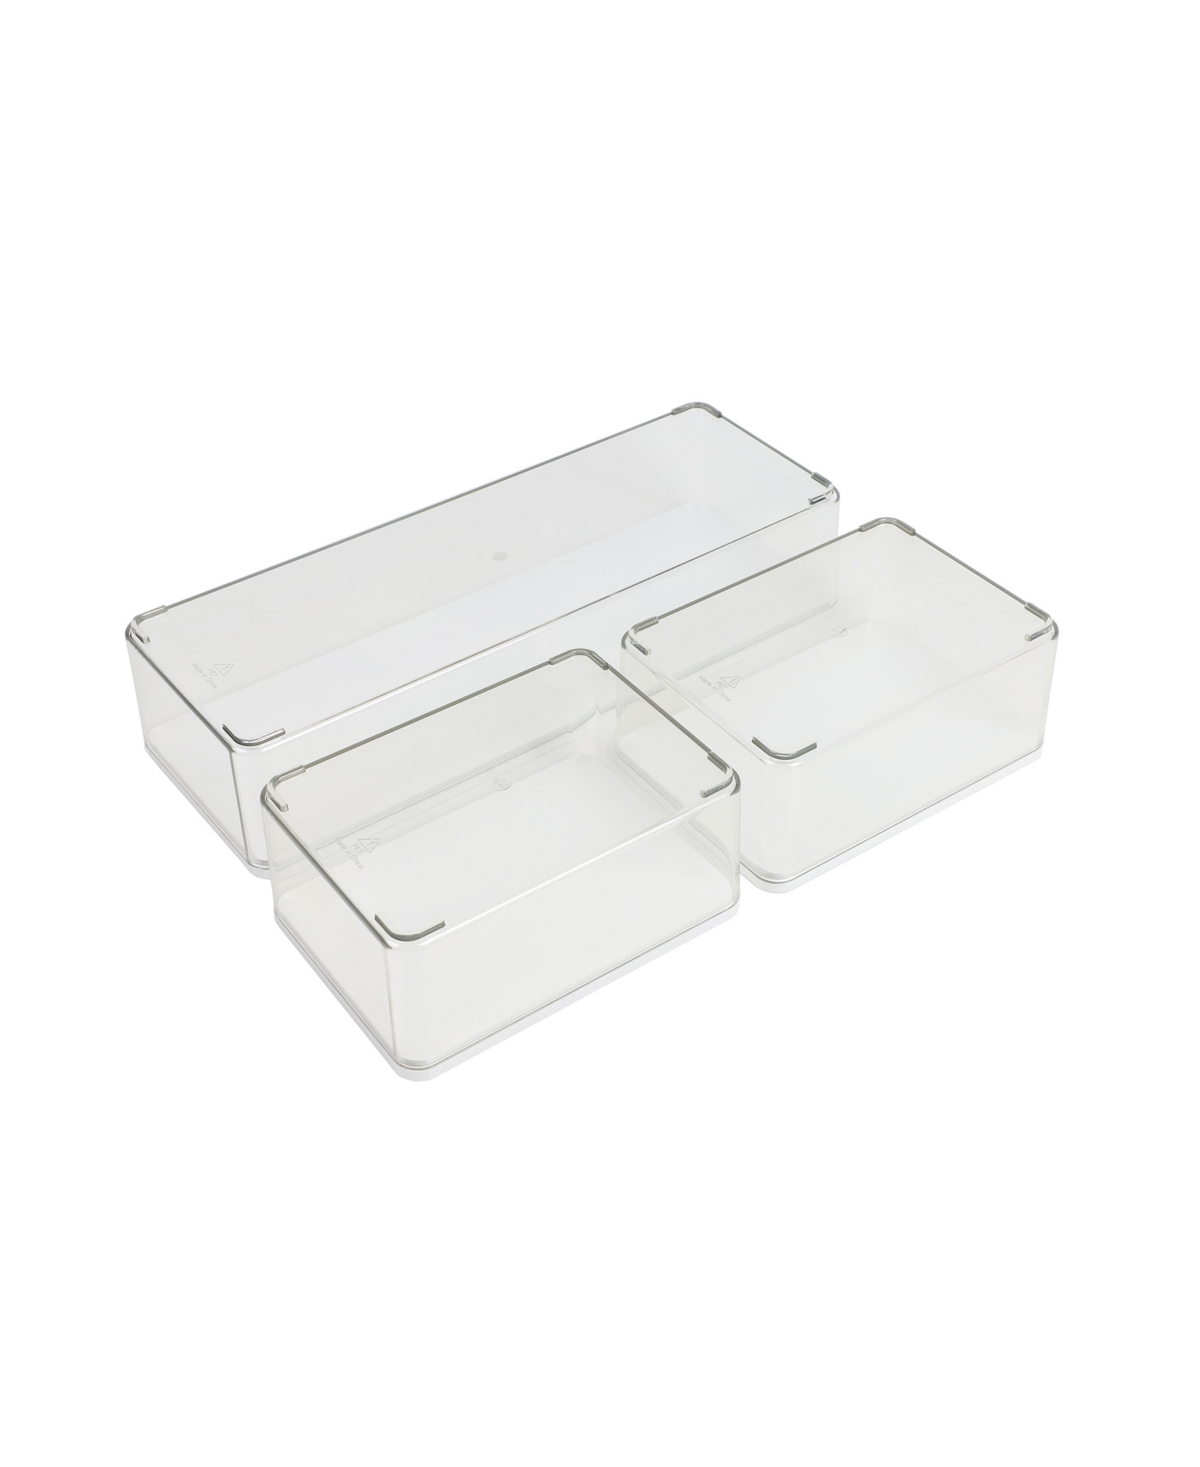 Grady Set of 3 Plastic Stackable Storage Boxes with Engineered Wood Lids - Clear, White